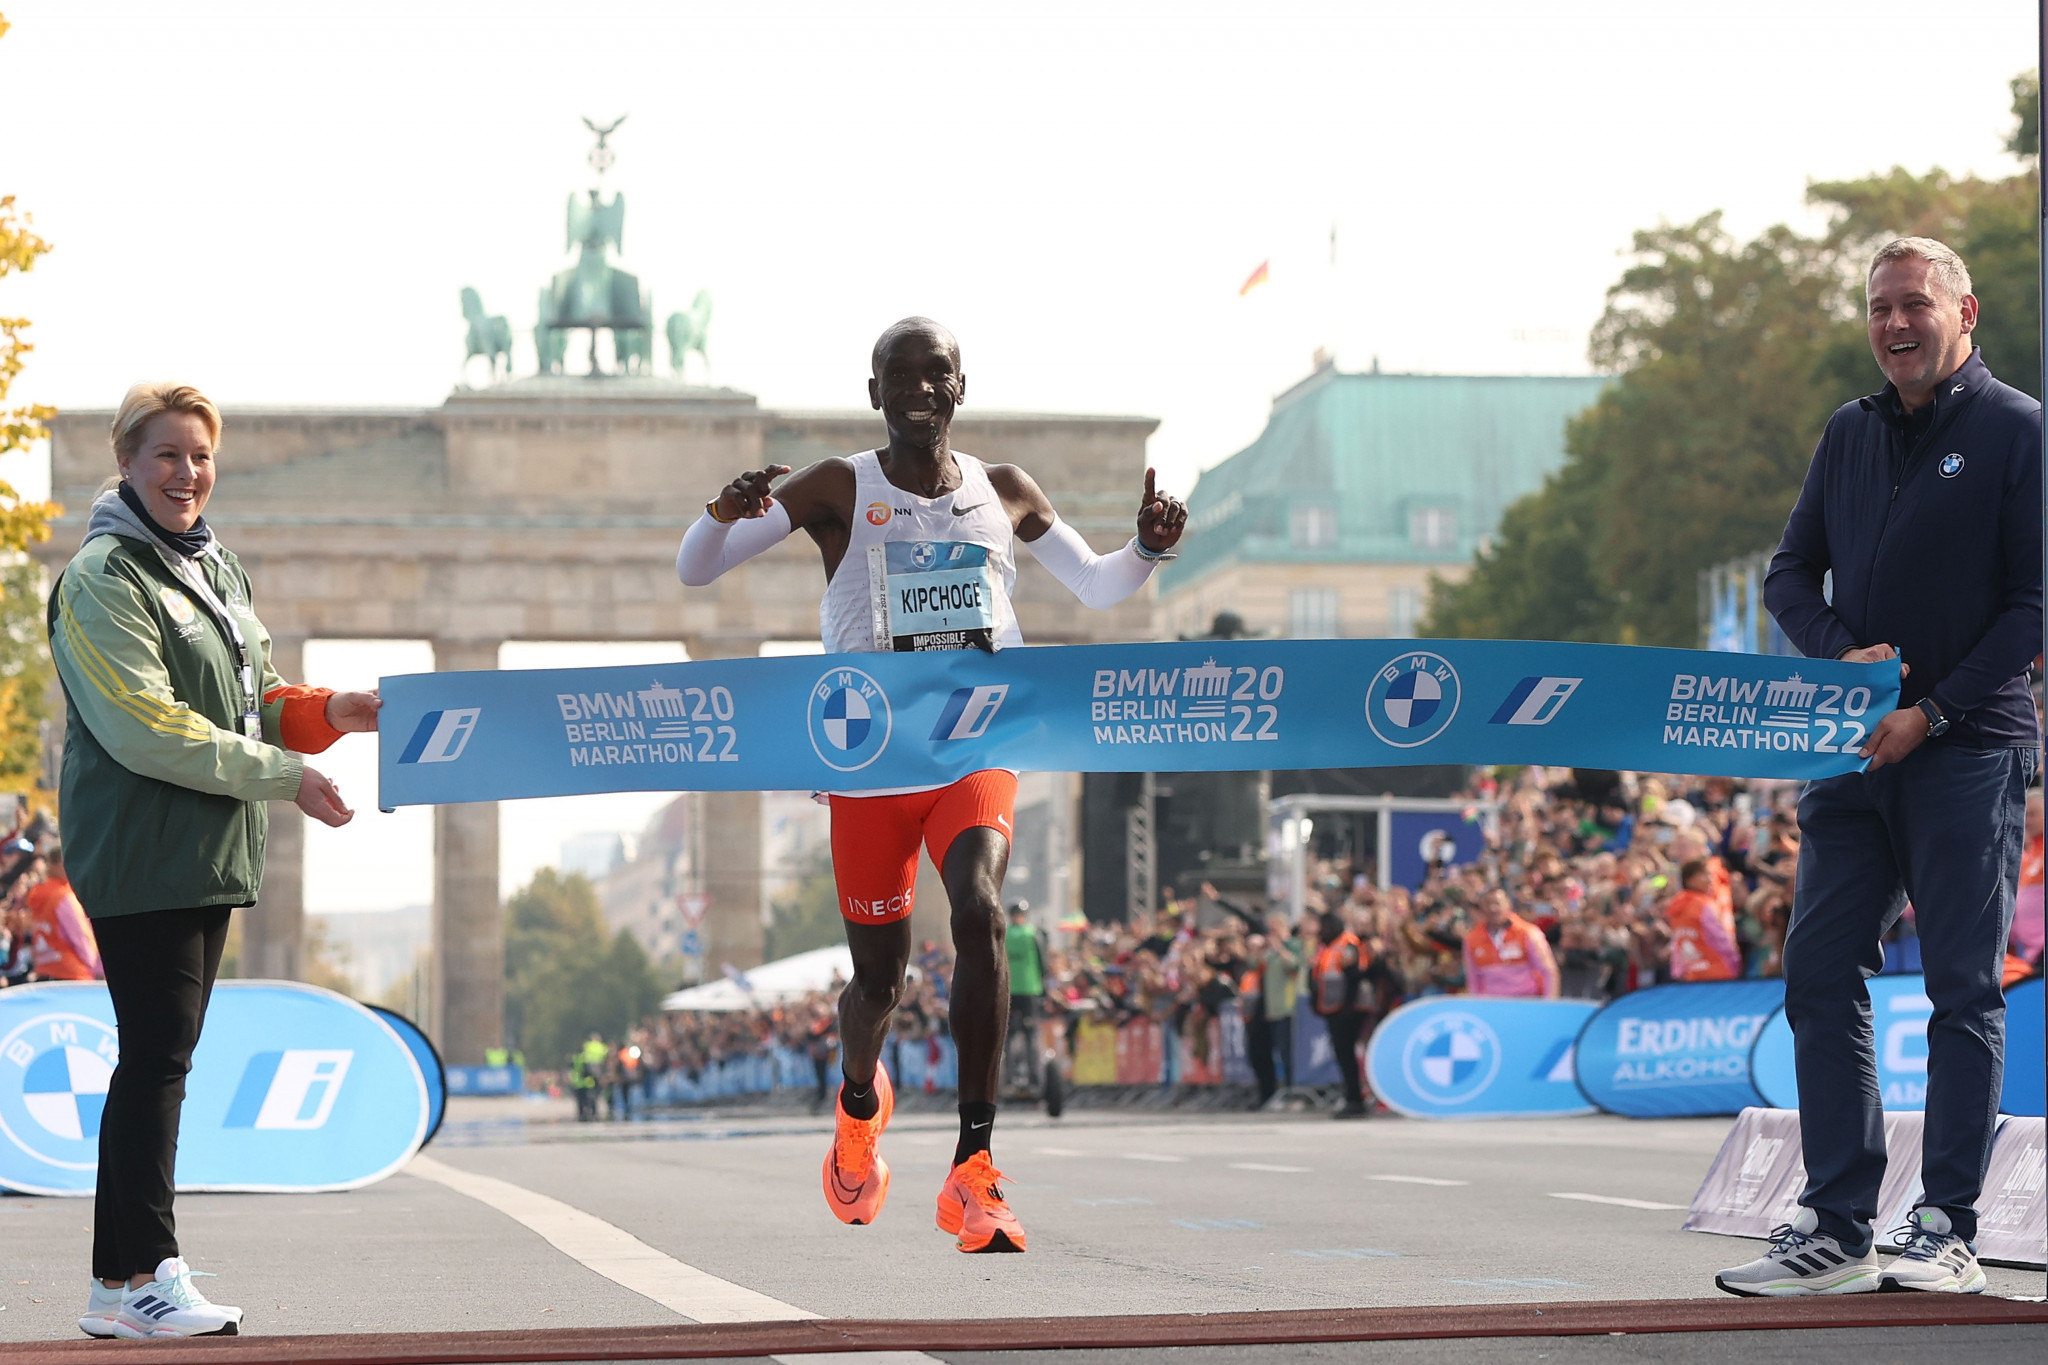 Kenya's Eliud Kipchoge will tomorrow defend his title at the Berlin Marathon, where he broke his own world record last year ©Getty Images